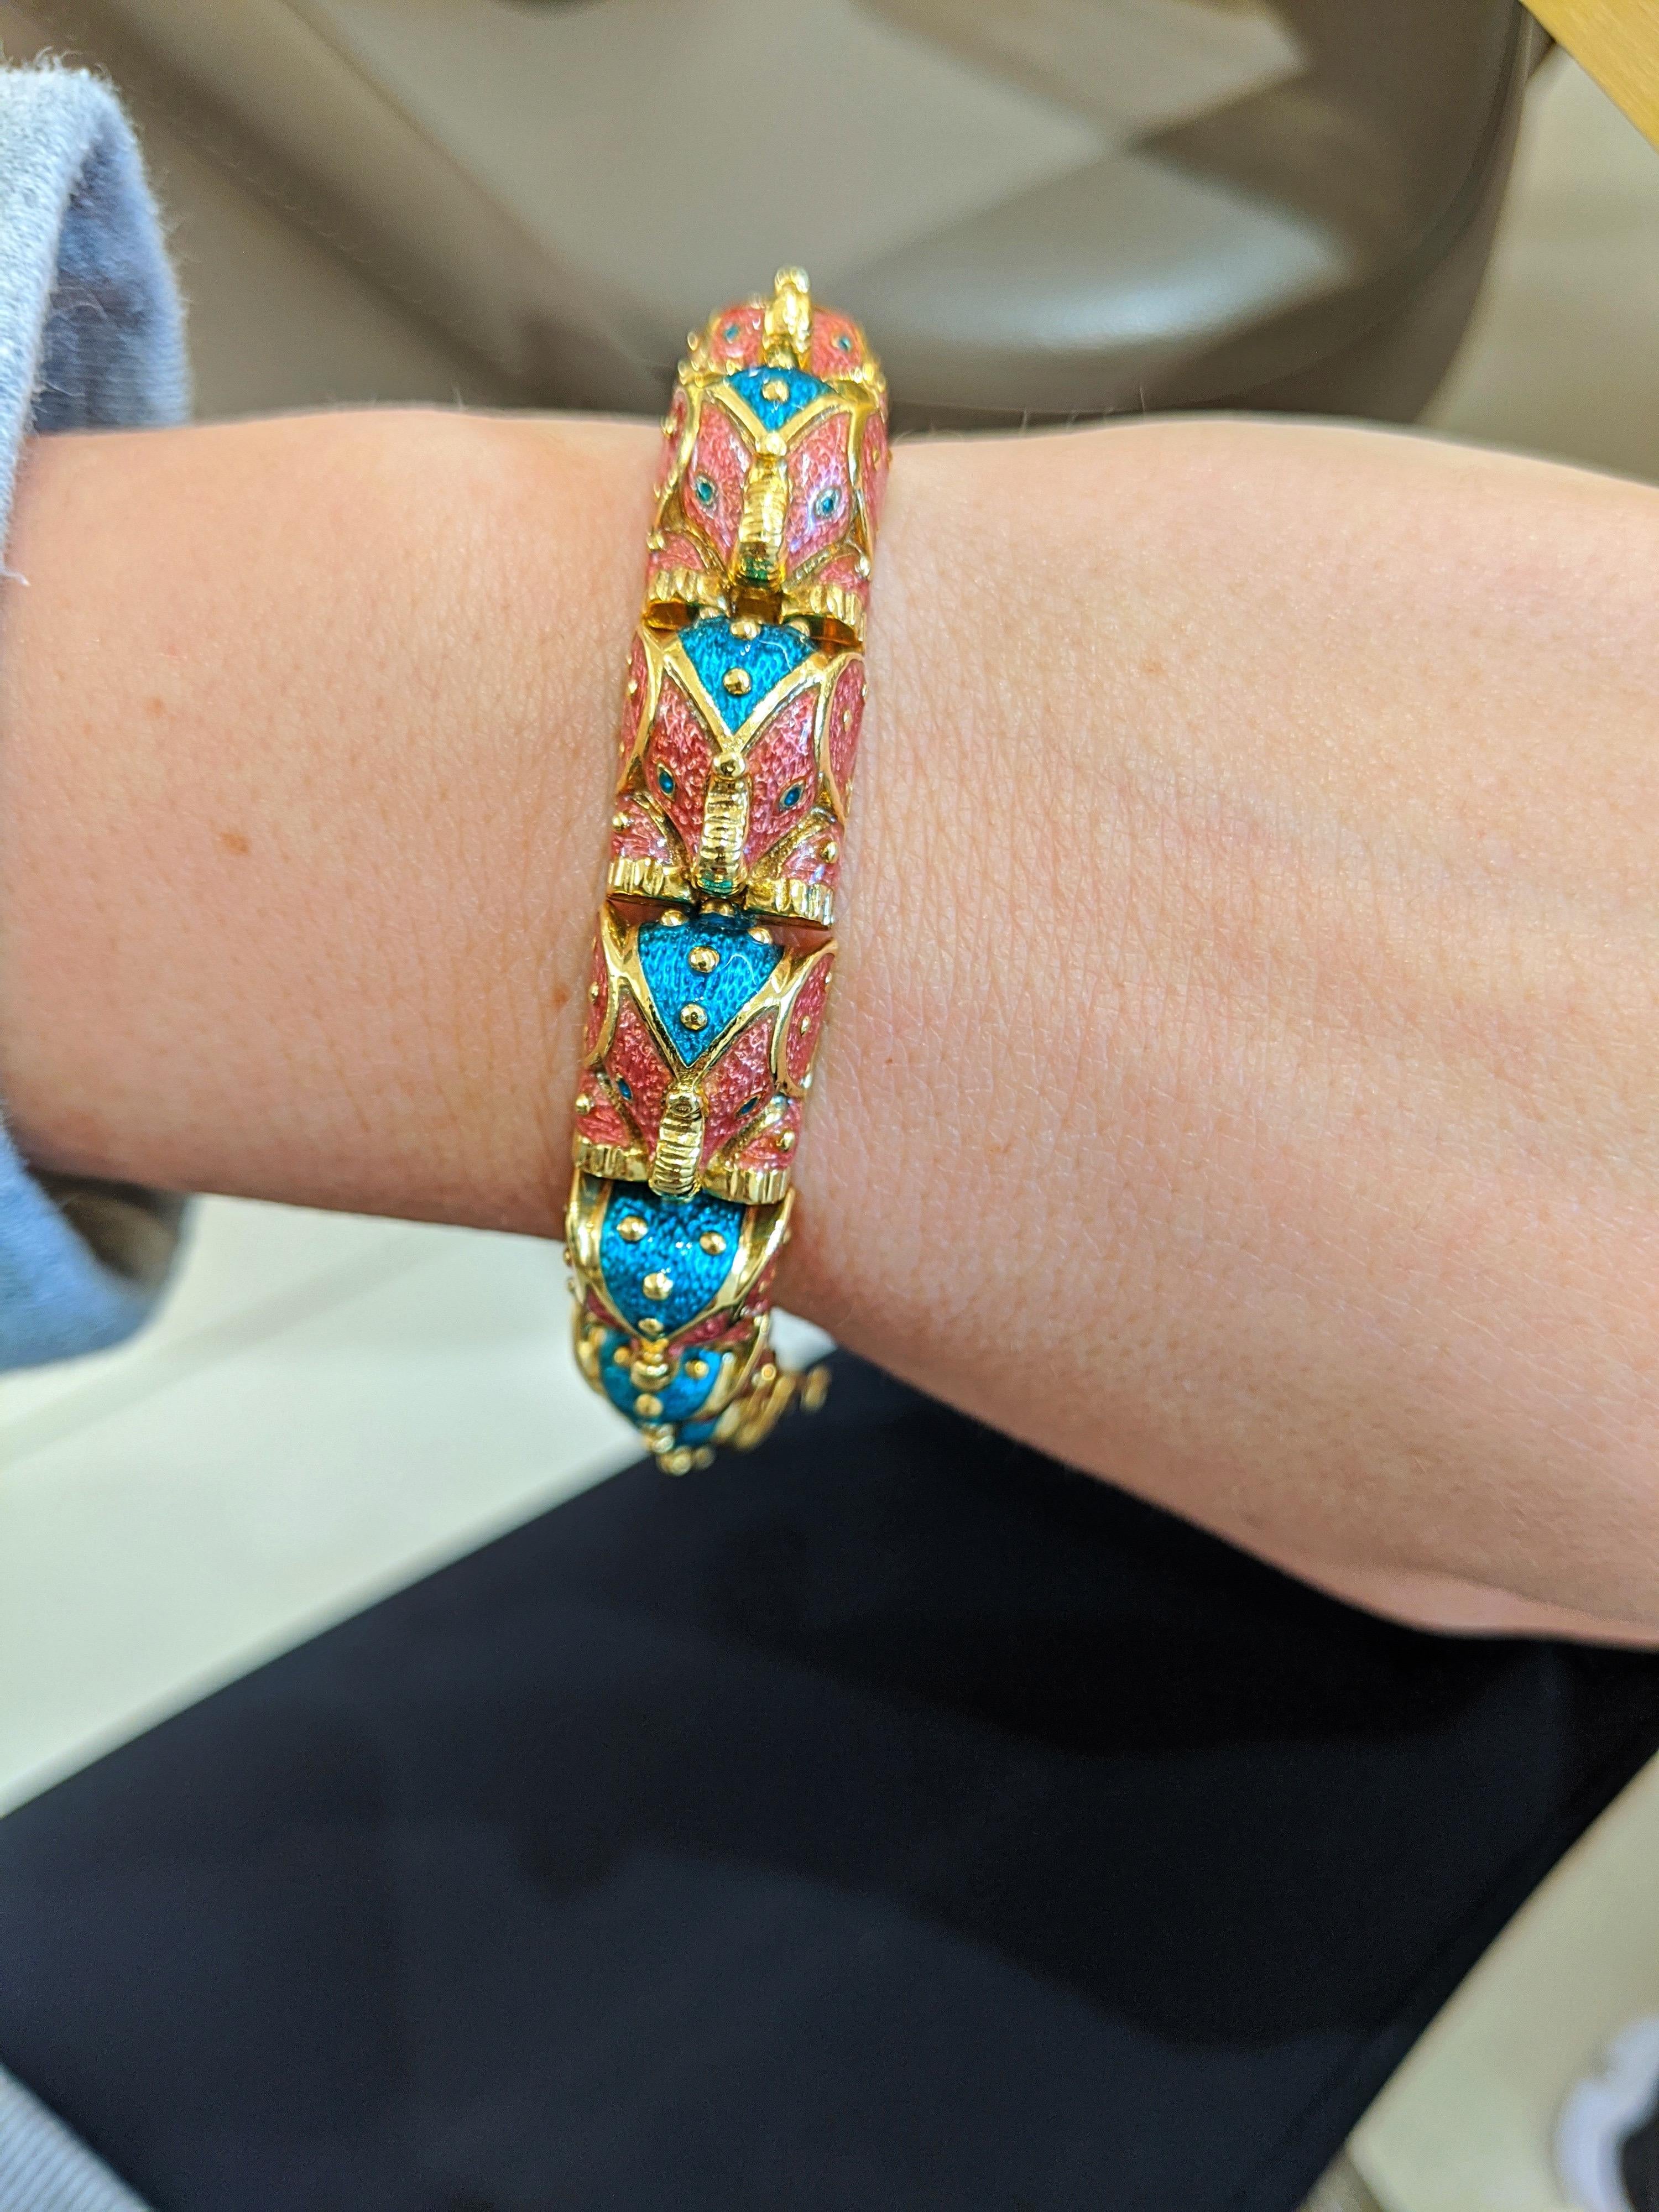 This 18 karat yellow gold bracelet was designed by Hidalgo.  The company is most noted for their beautiful enamel work. This bracelet is crafted with 12 pink and green enameled elephants. Each elephant is an individual link. The bracelet measures 7